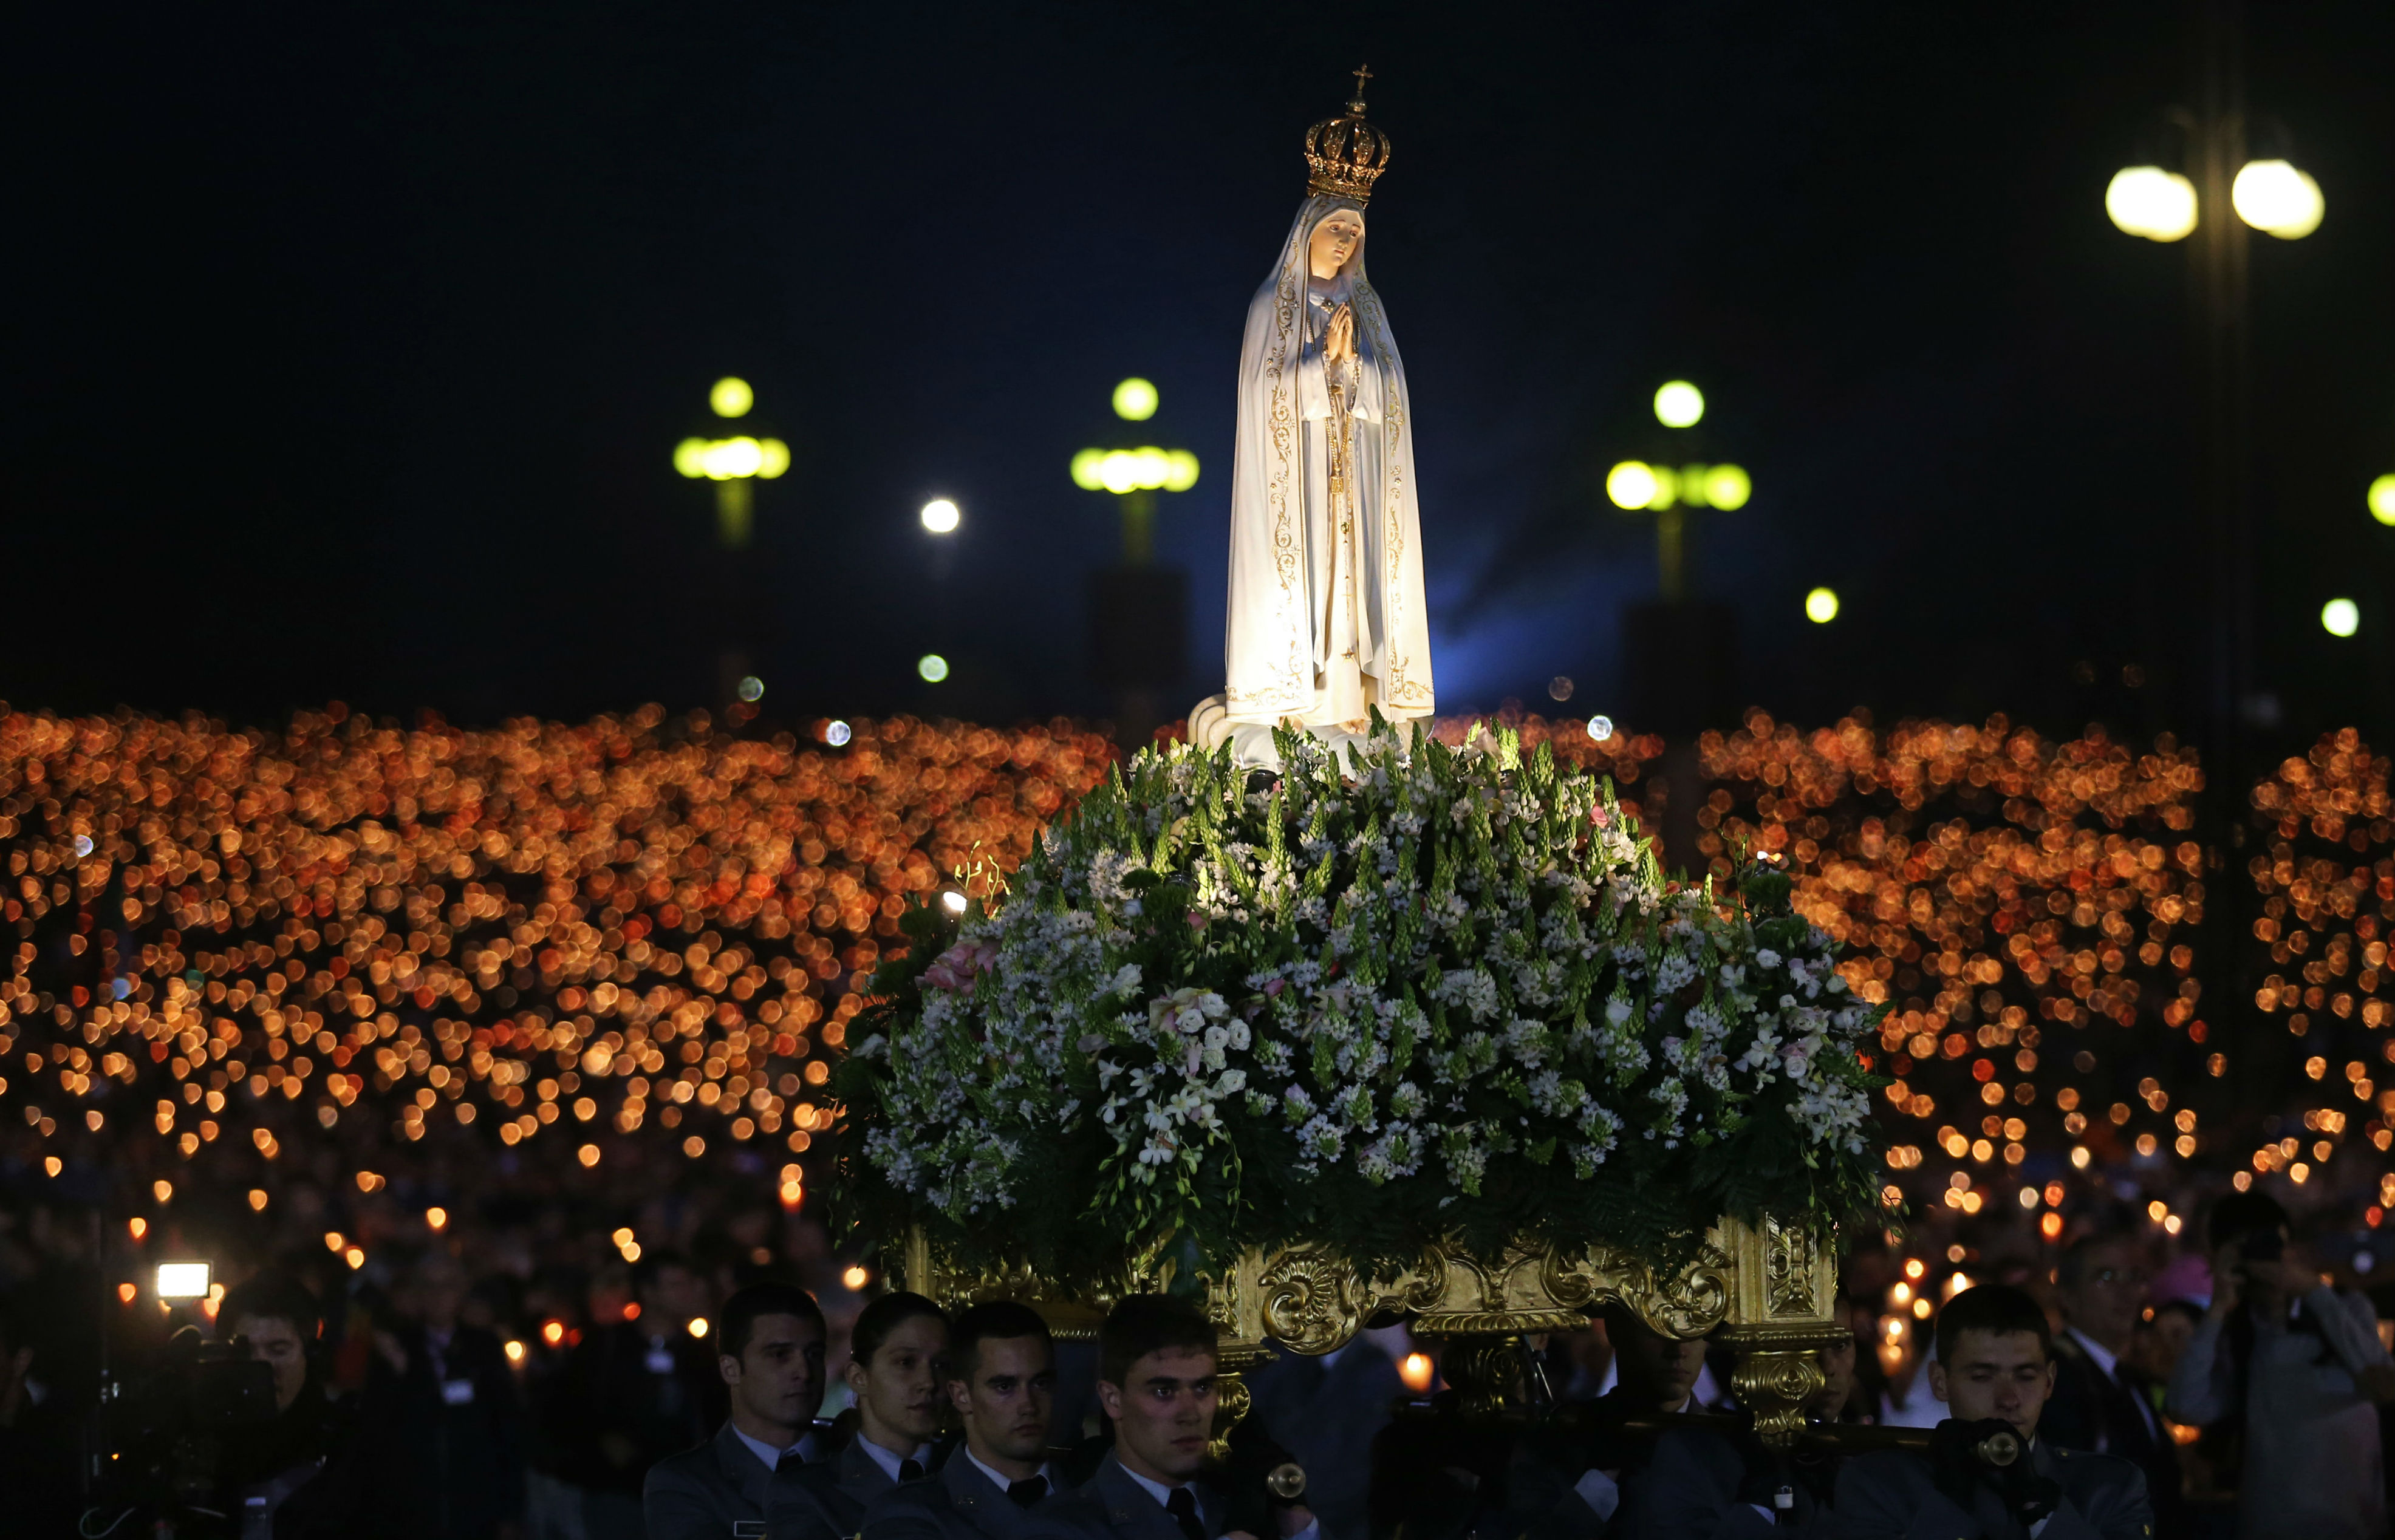 Pope Francis to visit Fatima in May 2017